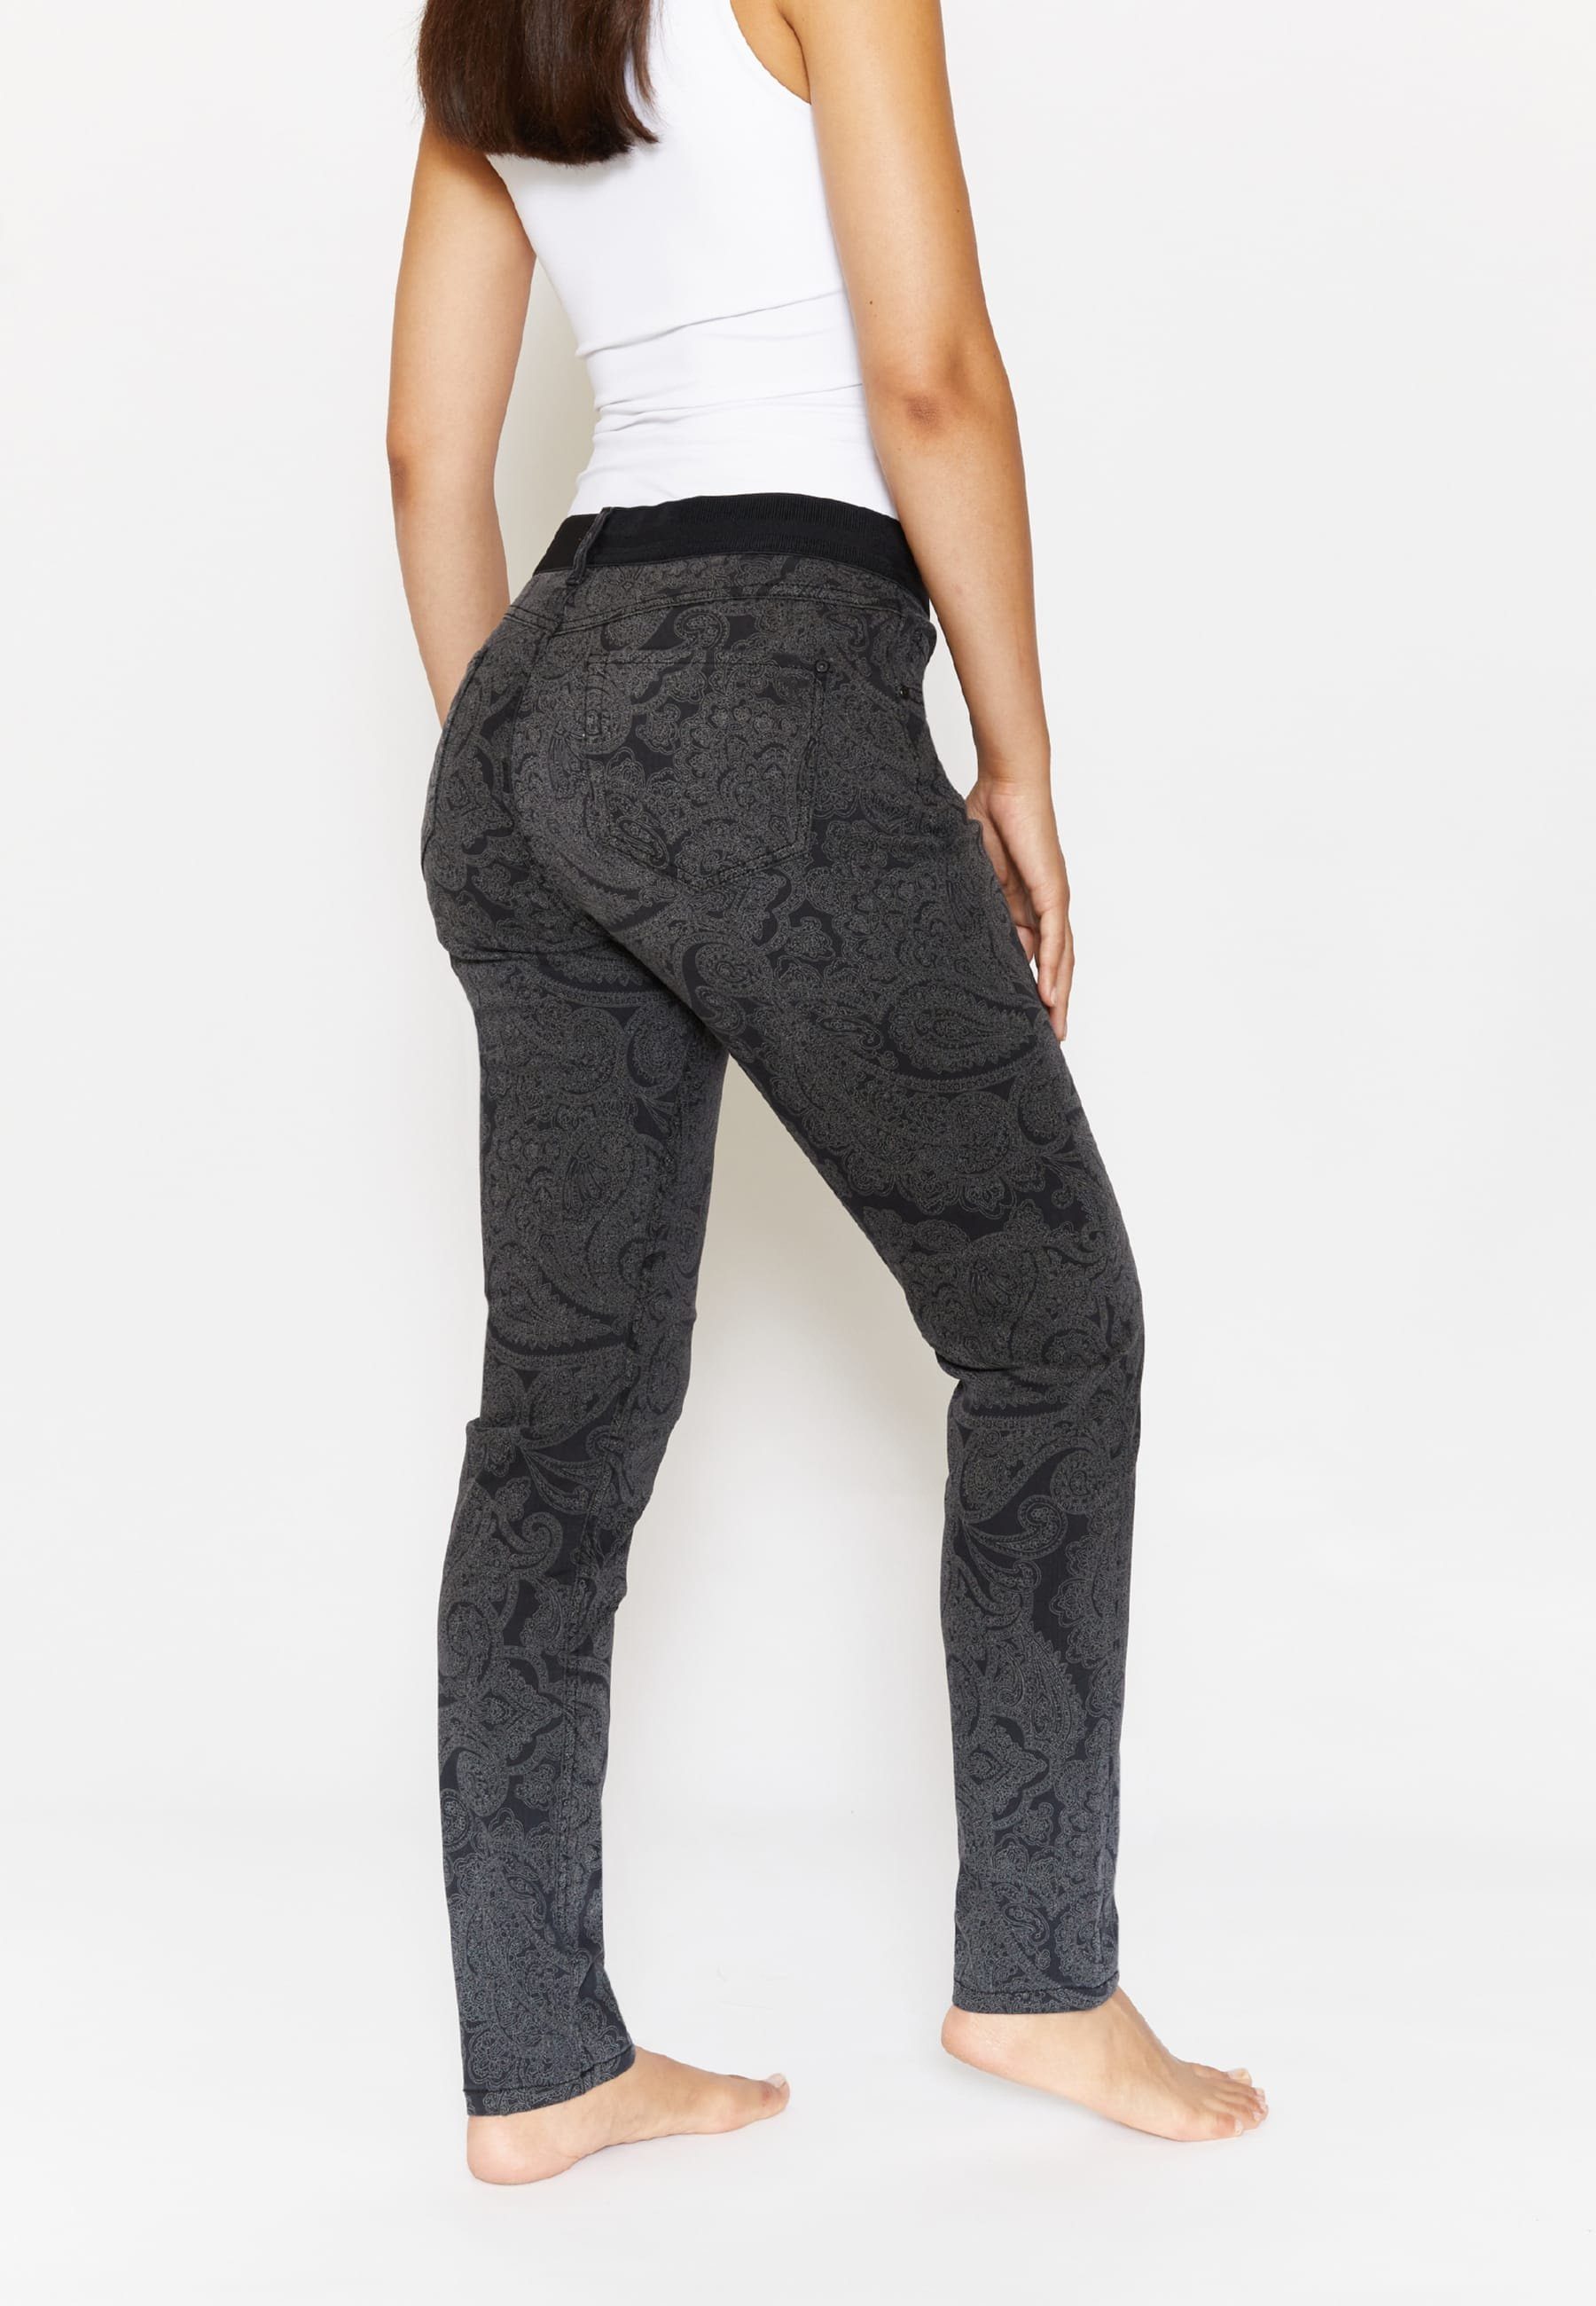 anthrazit Label-Applikationen Slim-fit-Jeans Paisley-Muster Jeans Size mit One ANGELS mit